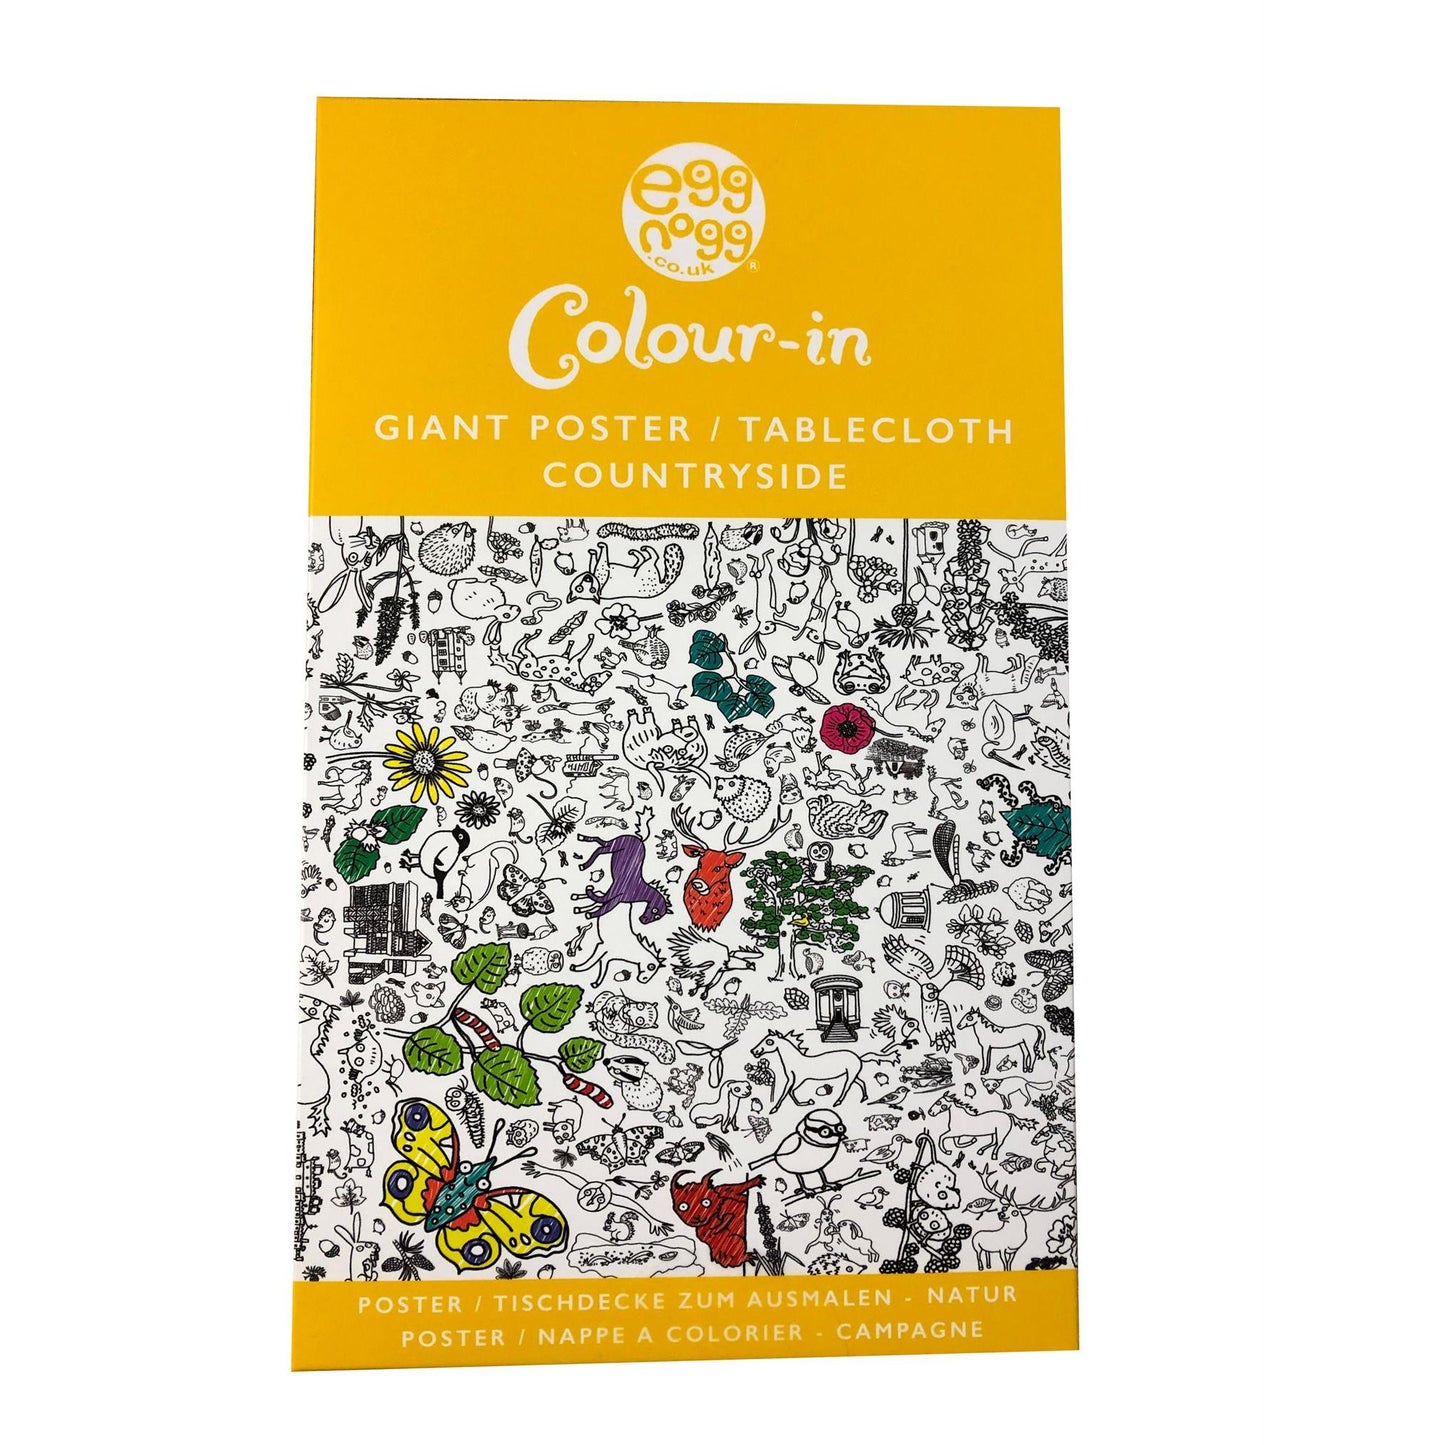 Eggnogg Colour In Giant Poster Tablecloth